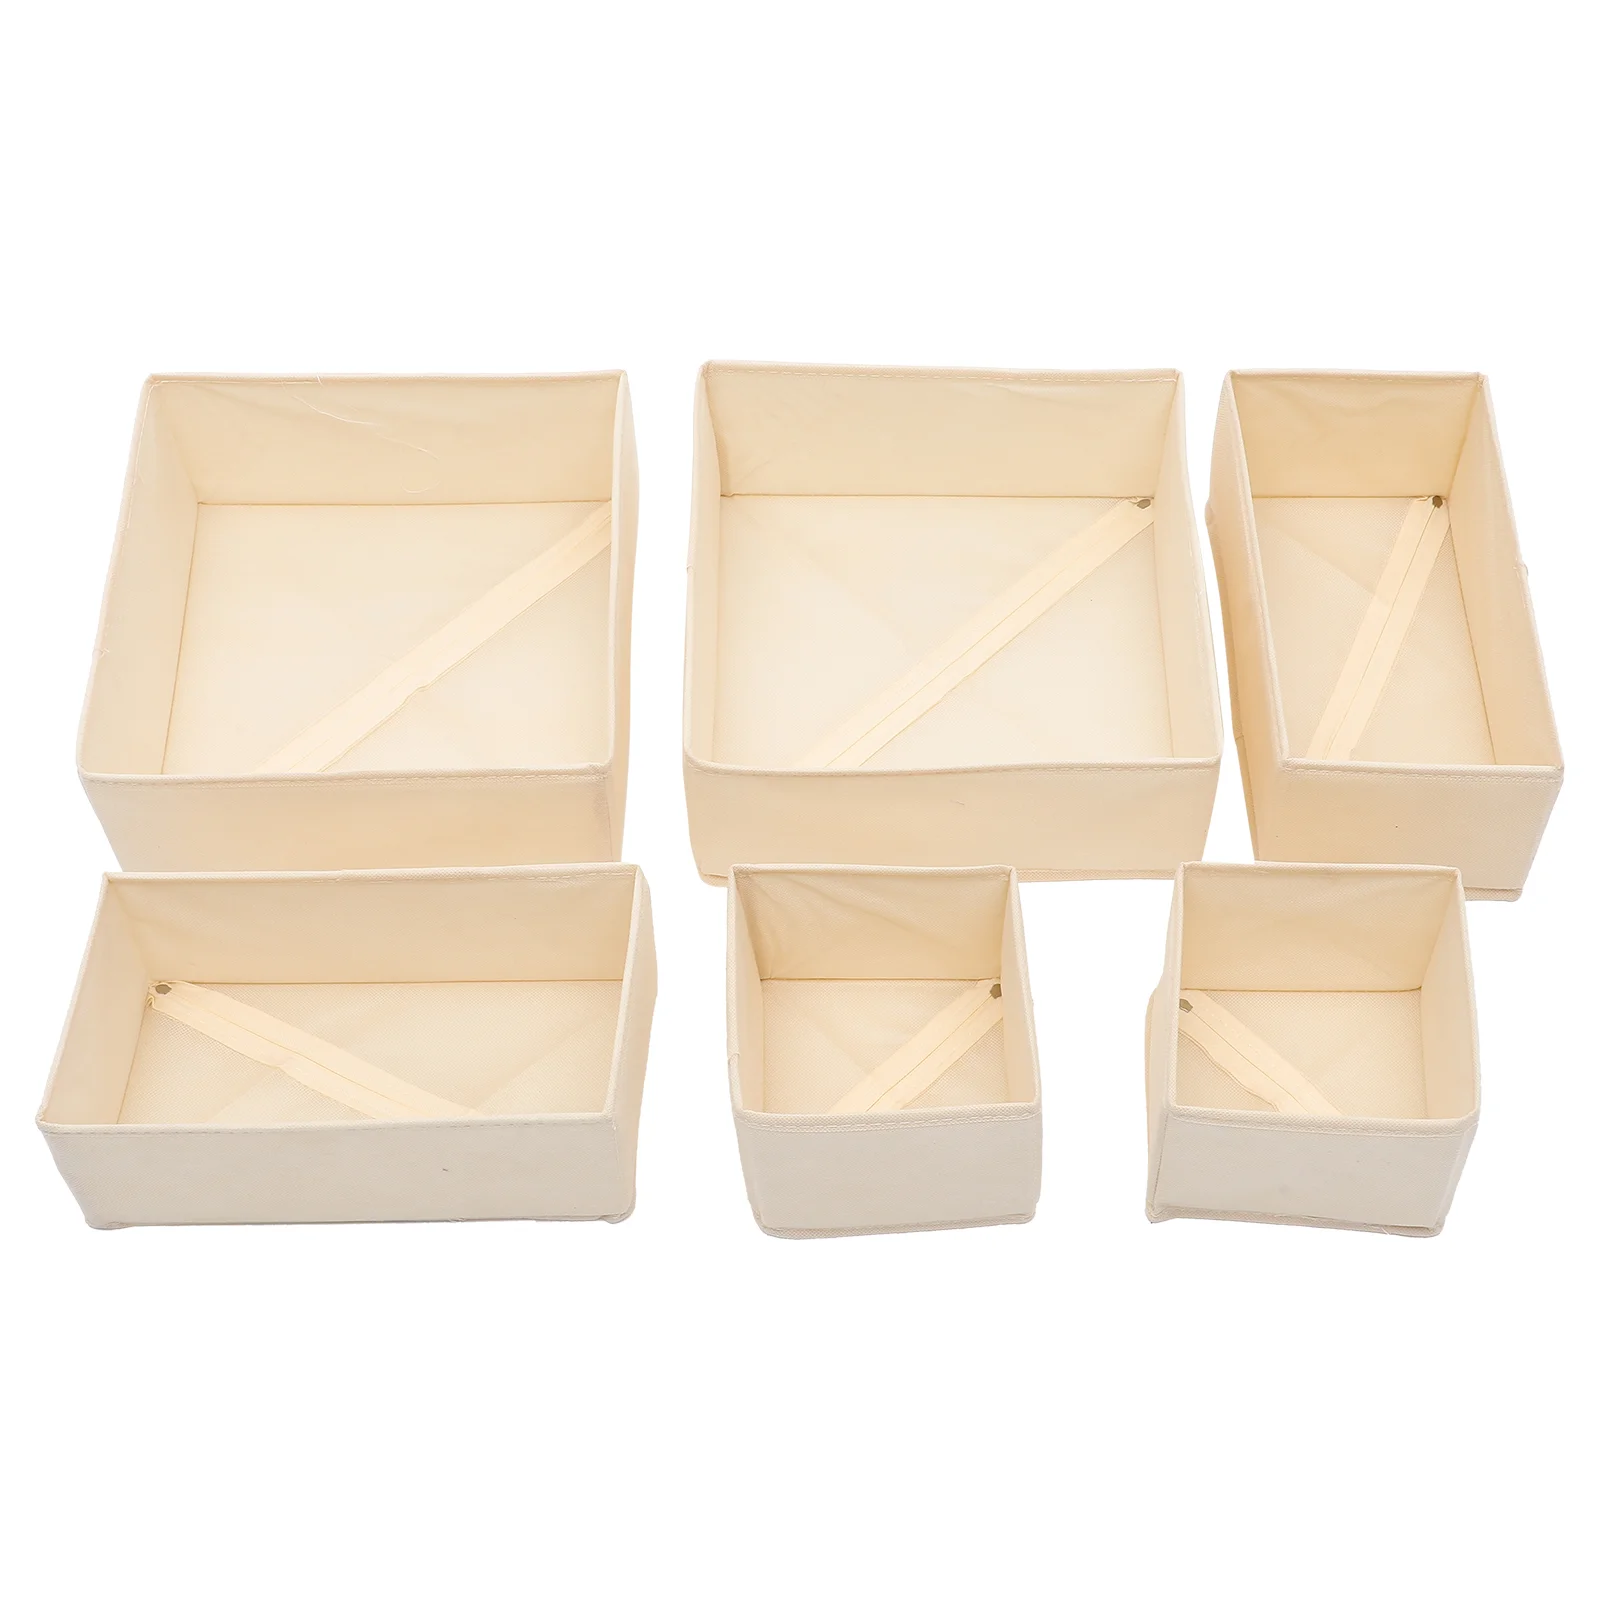 

6 Pcs Clothes Storage Box Household Case Bins Closet Holder Sock Towel Foldable Container Cases Organizer Drawer organizers